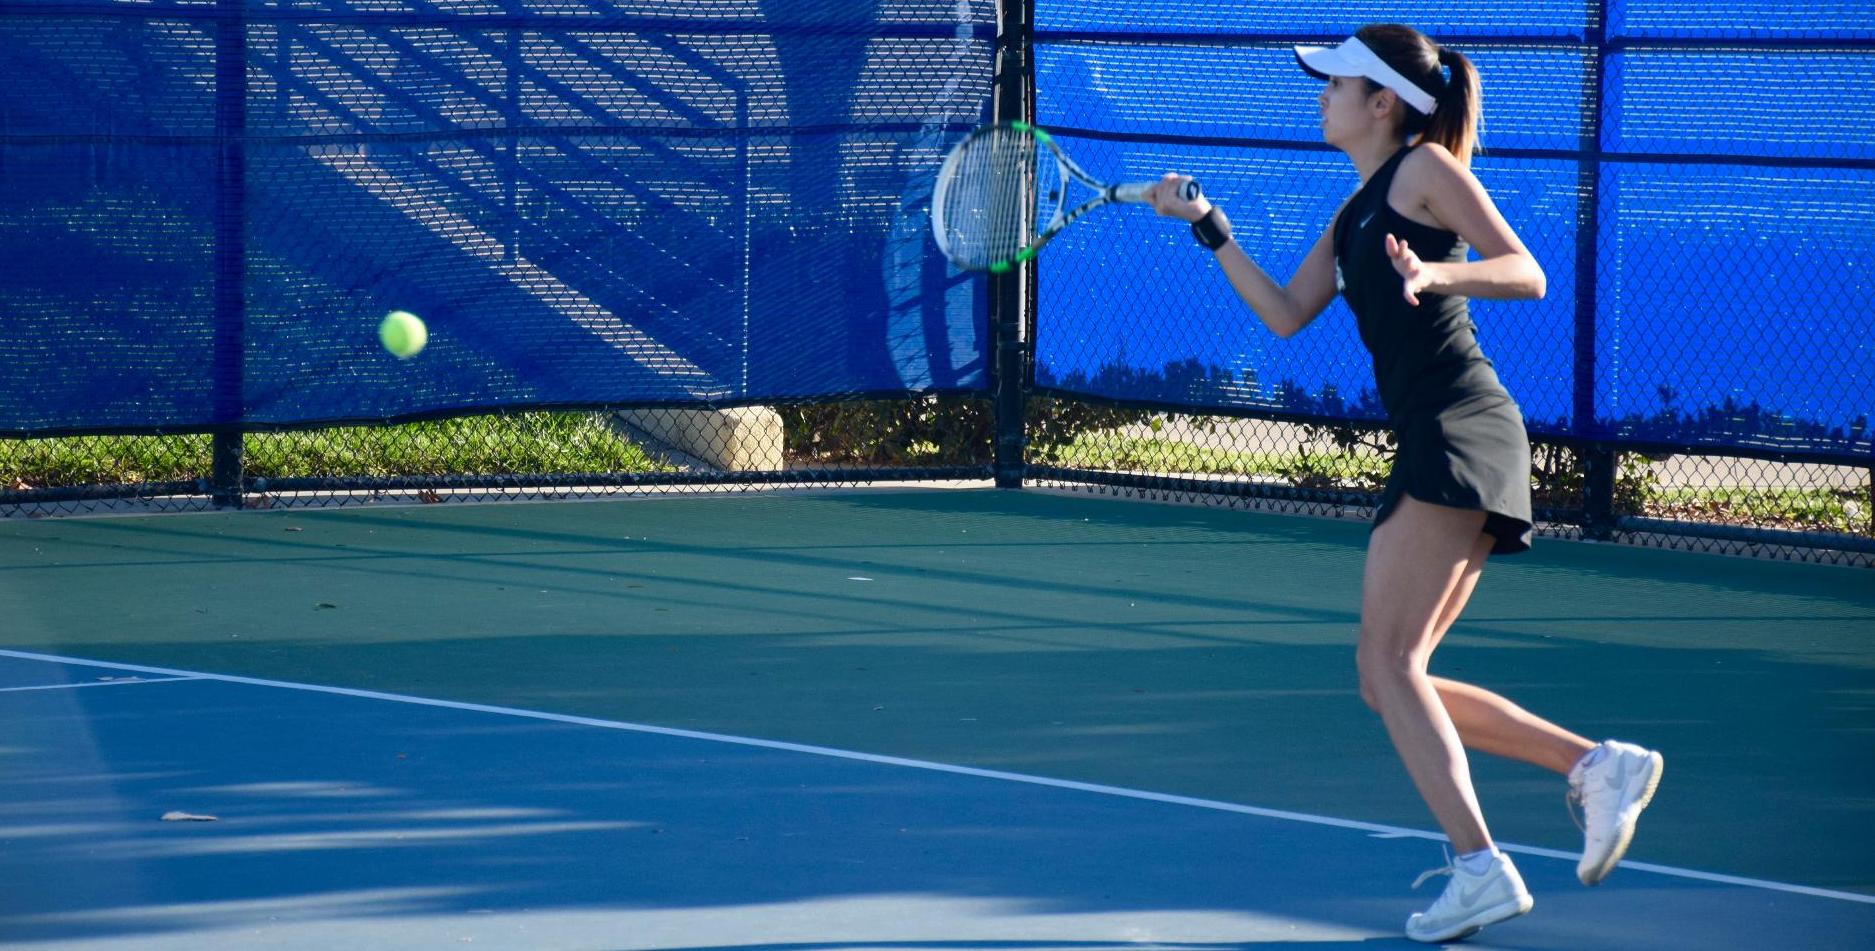 Women's tennis team loses close one to Glendale